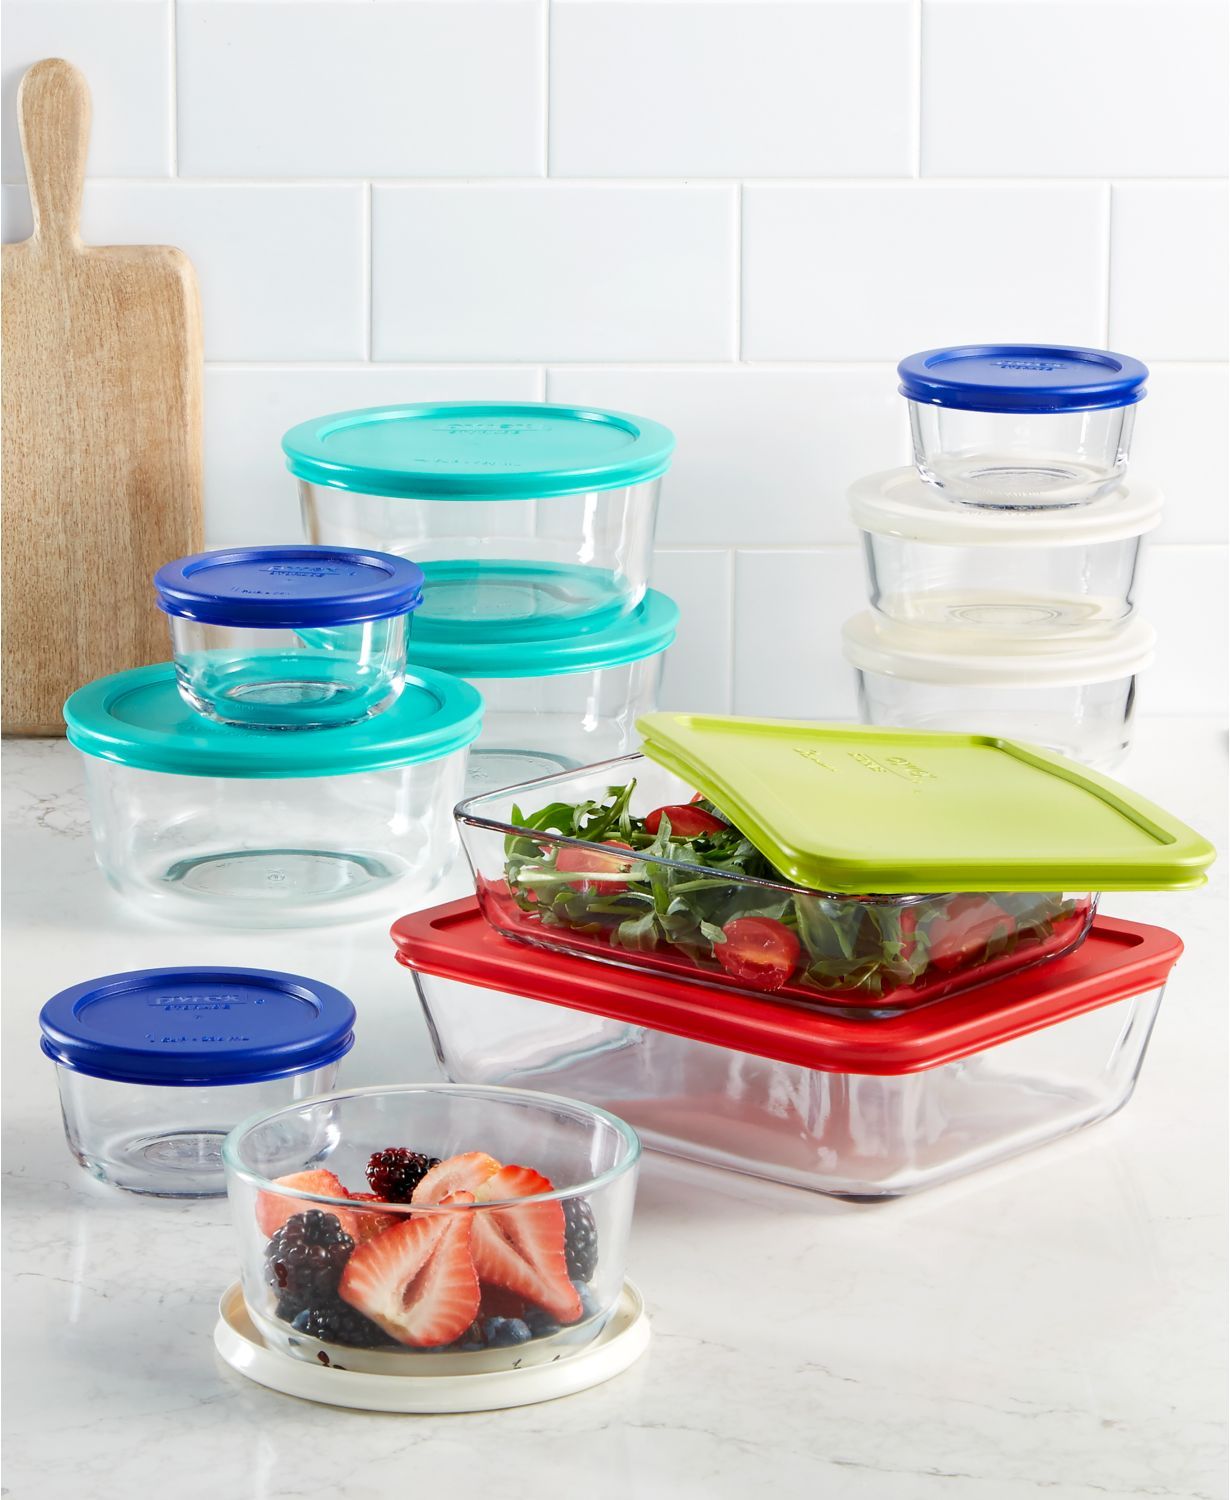 Go Beyond Bland: Designer Plastic Containers